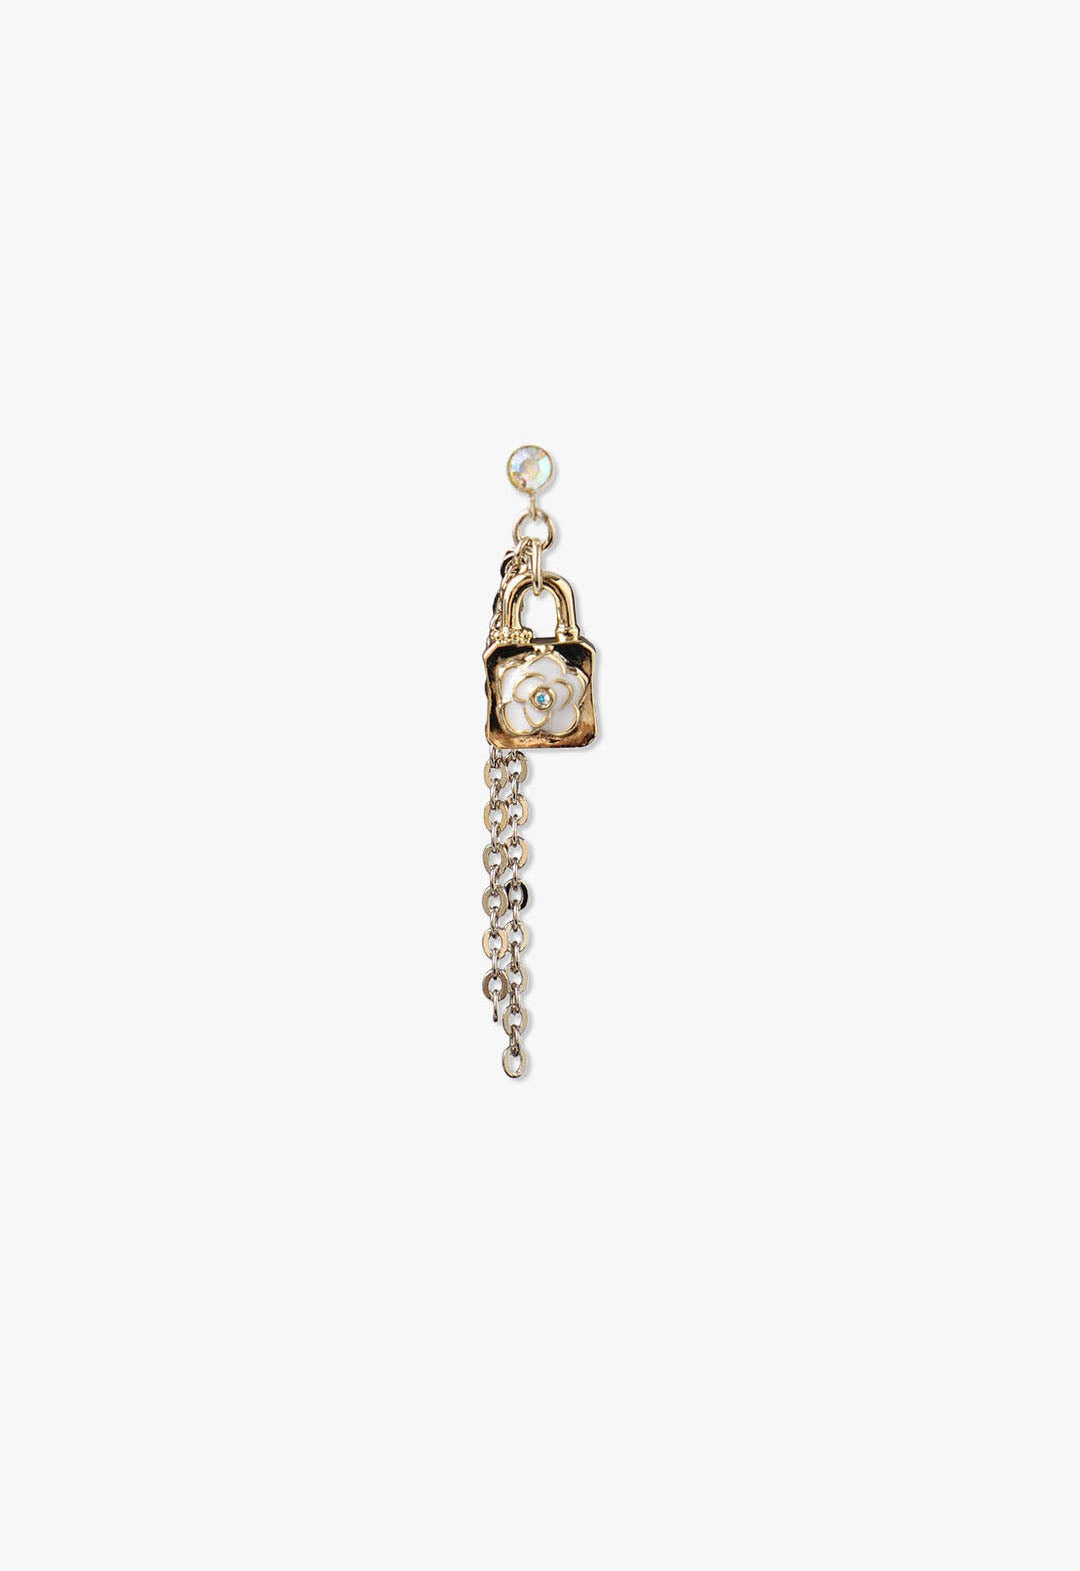 Large golden chain links, one lock with a white rose and blue stone, studs come with a blue stone